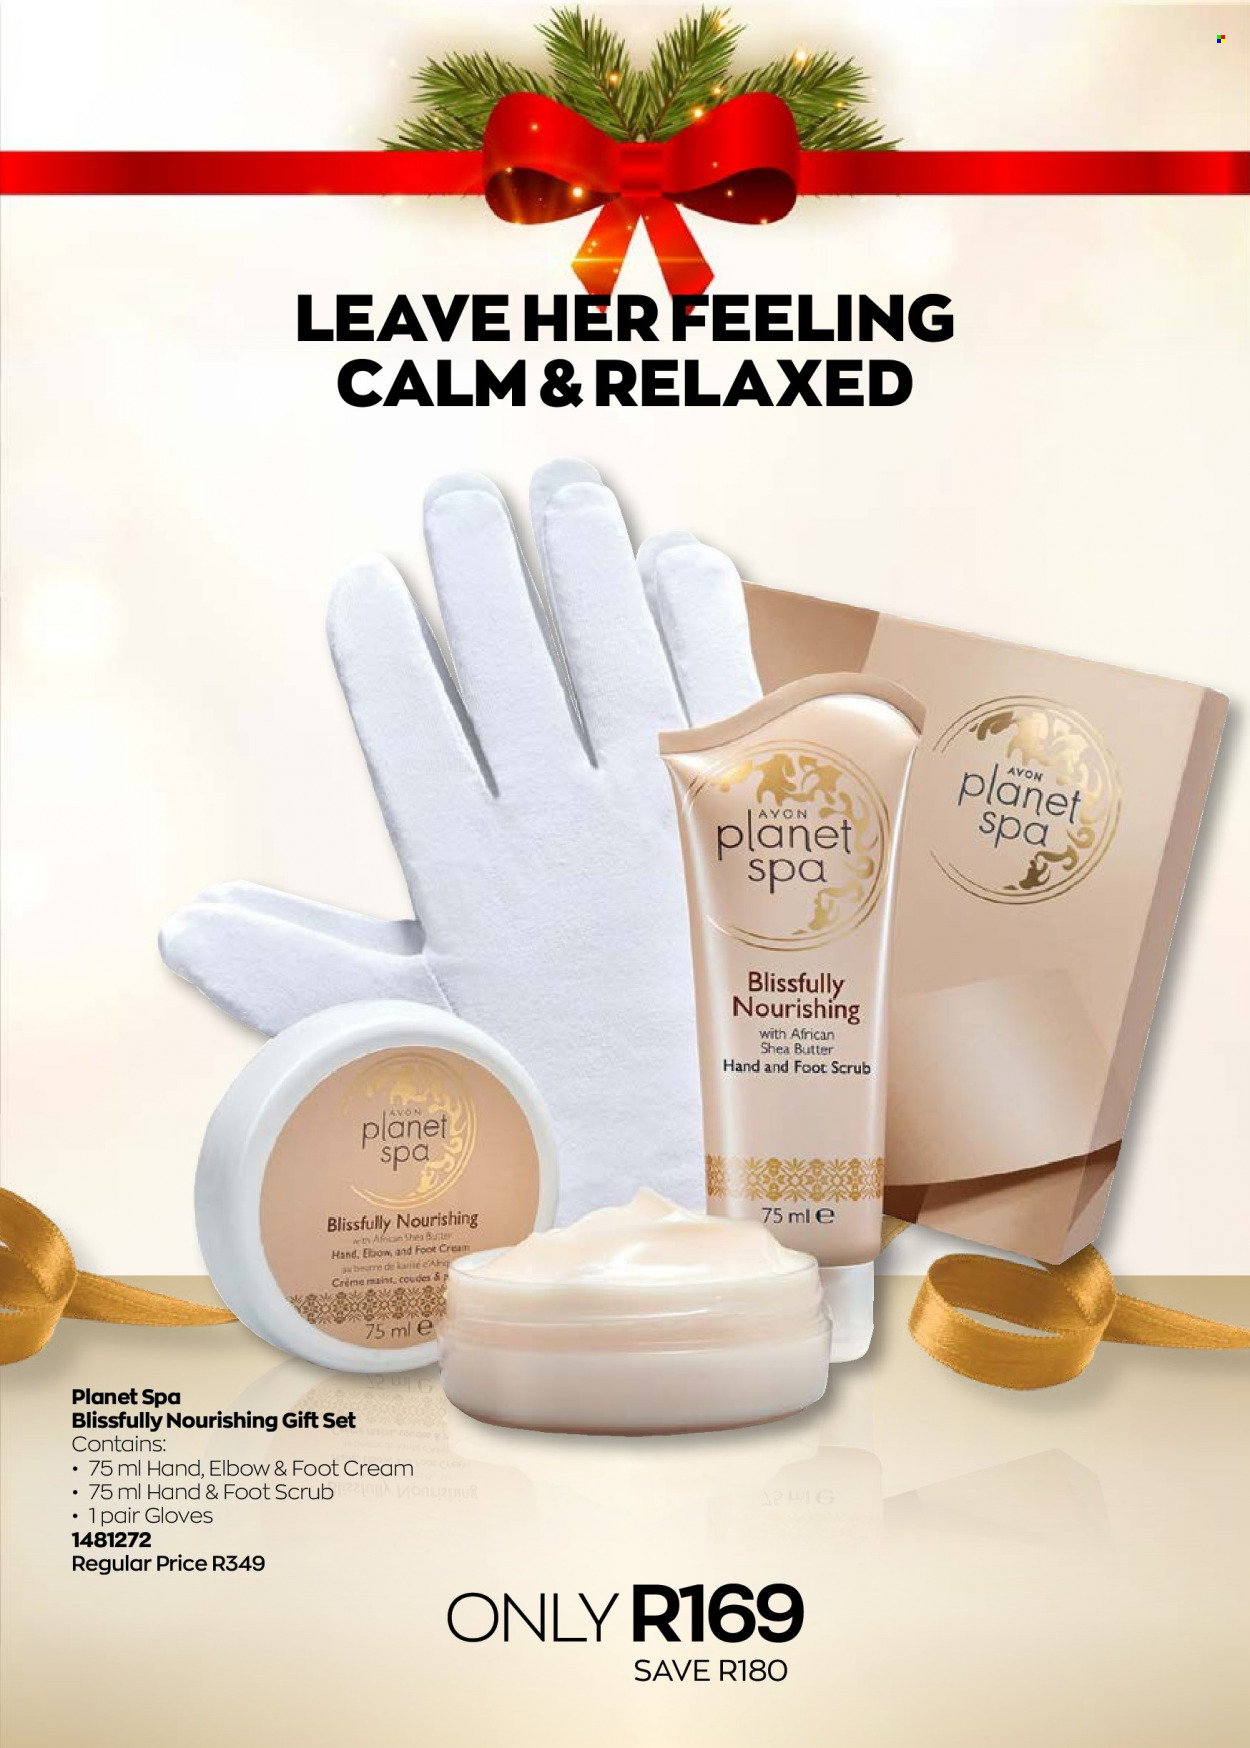 thumbnail - Avon catalogue  - 11/12/2022 - 31/12/2022 - Sales products - Planet Spa, shea butter, gift set. Page 50.